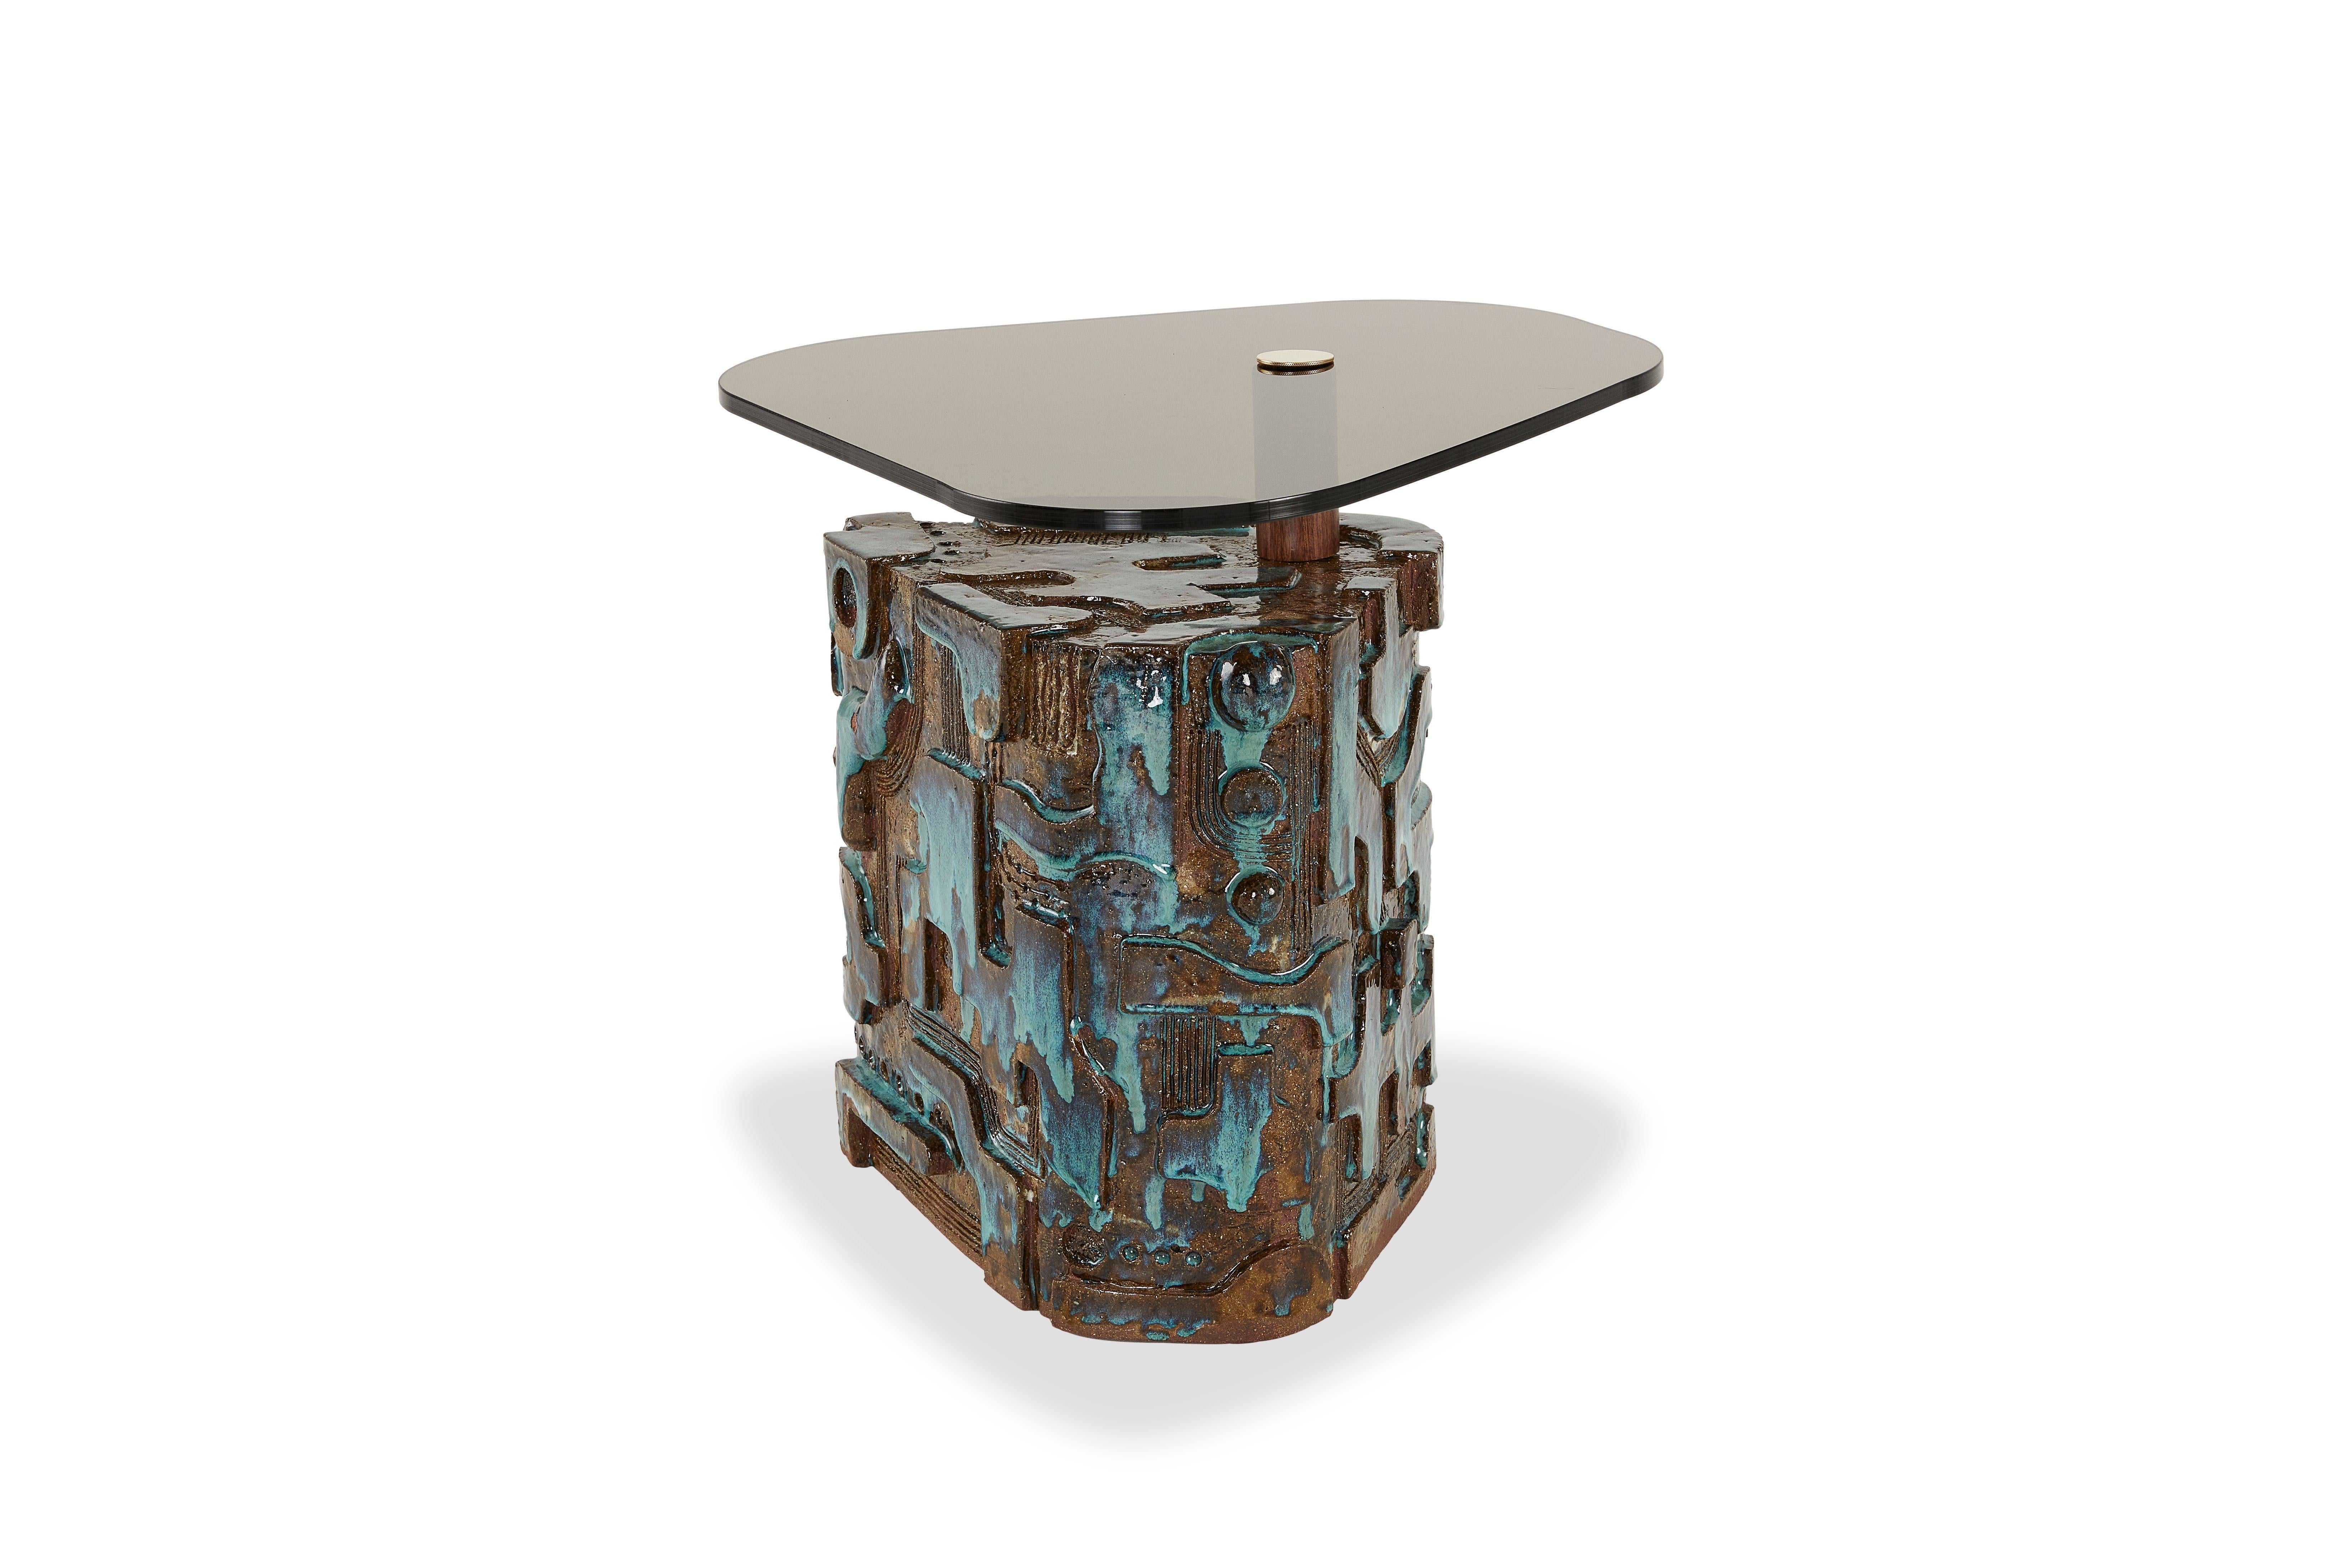 So Disco side table by Egg Designs
Dimensions: 56 L X 51 D X 52 H cm 
Materials: Smokey Glass, Walnut Timber, Brass, Handmade Ceramic

Founded by South Africans and life partners, Greg and Roche Dry - Egg is a unique perspective in contemporary